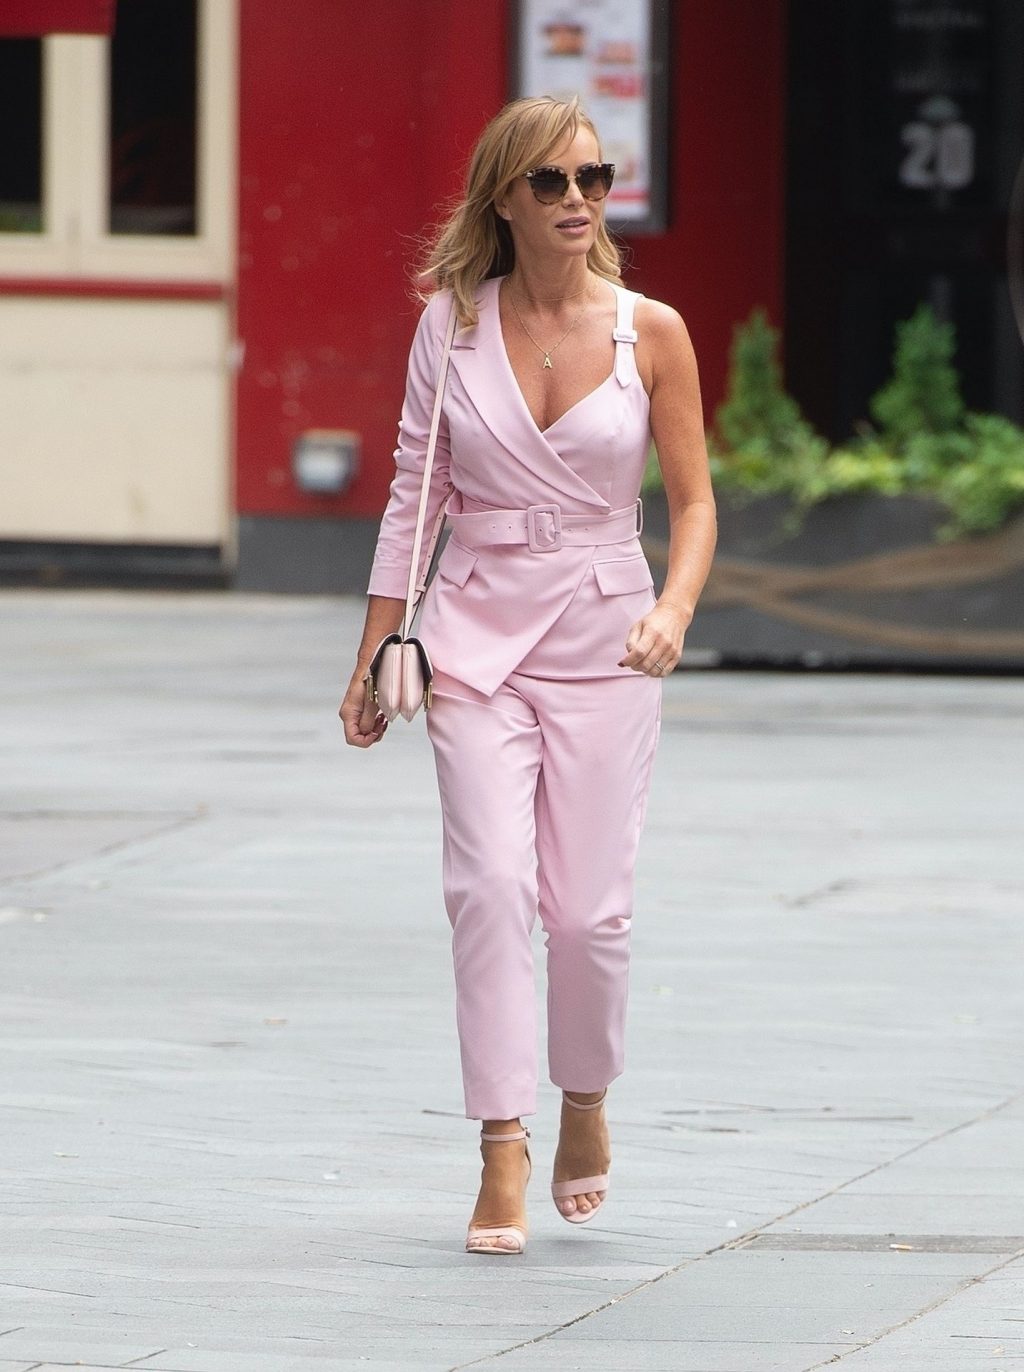 Amanda Holden Looks Hot in All Pink in London (64 Photos)